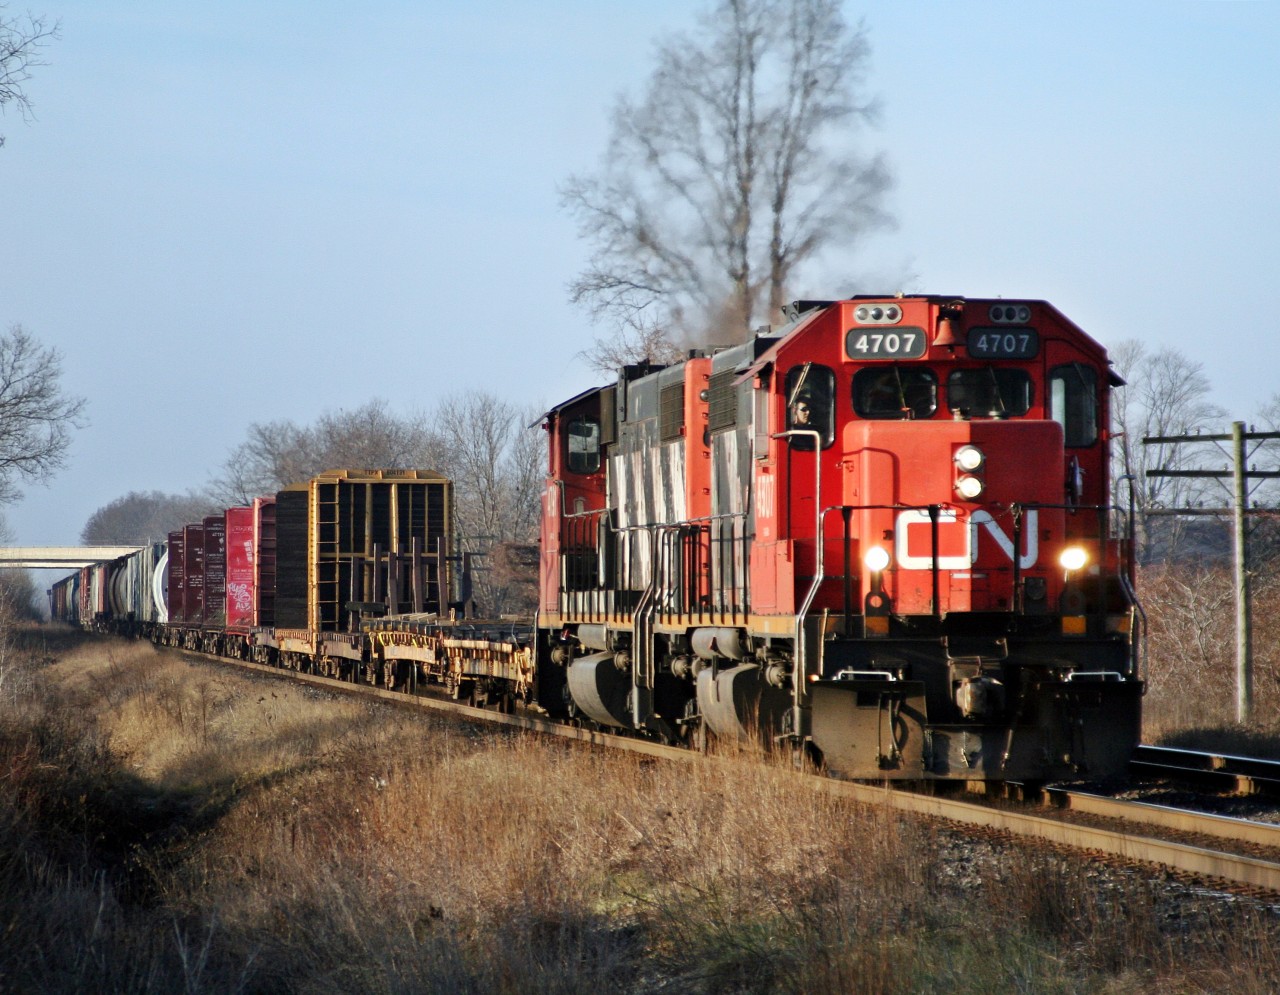 Coming from Windsor Ontario, CN 438 is making good time as they head towards London. Once there, they will drop their train, move over one track and head back to Windsor as CN 439